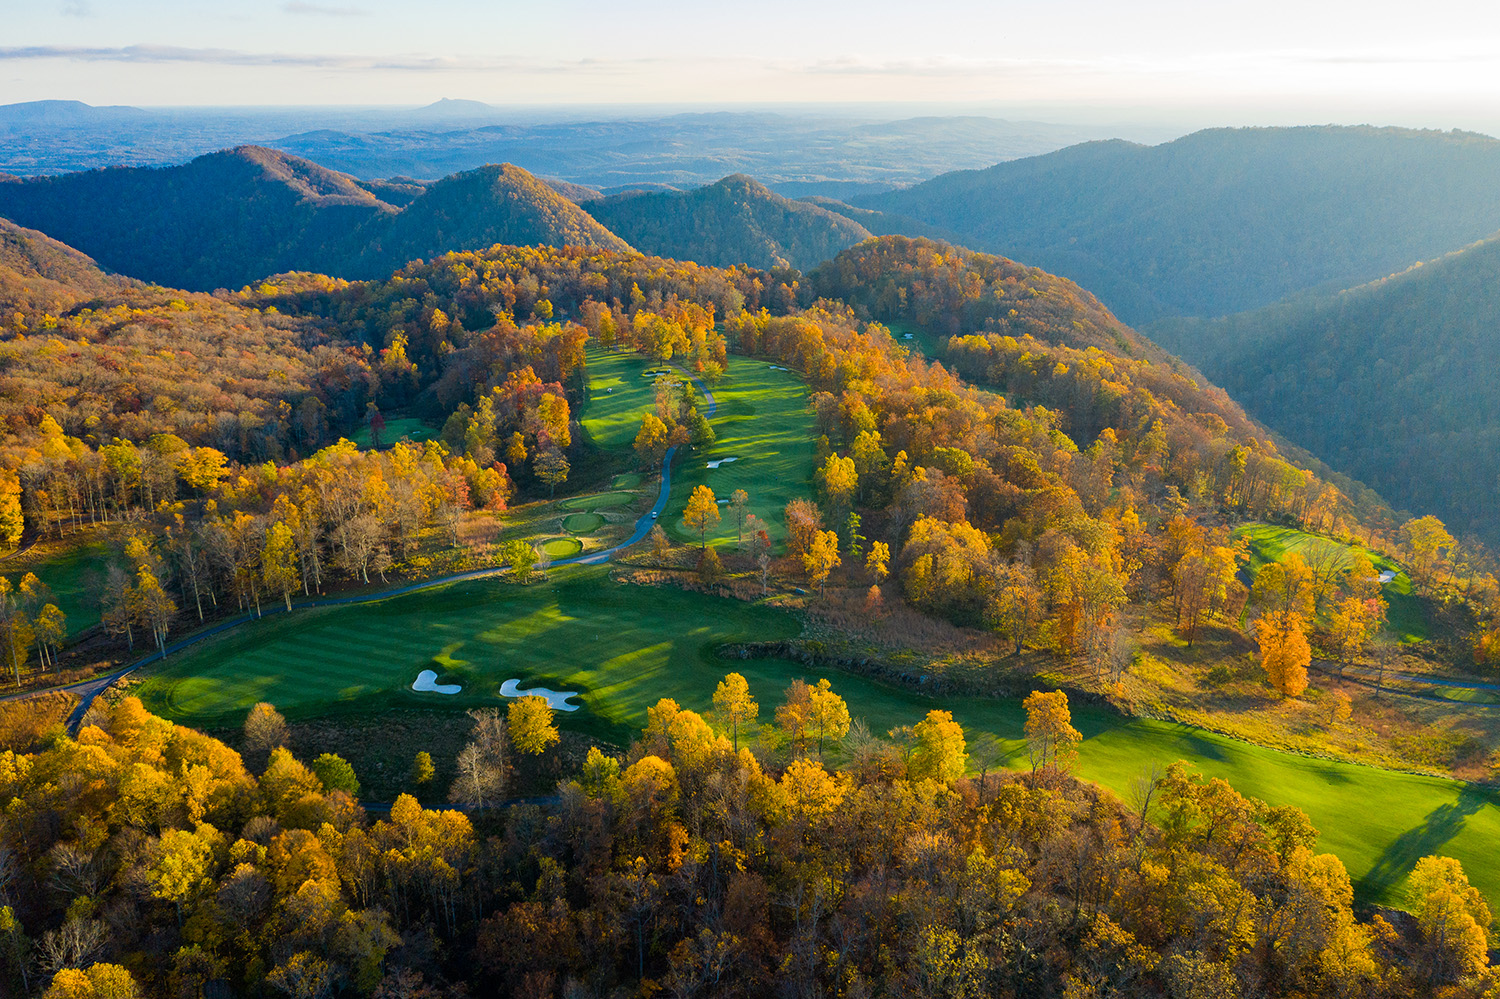 Highland Course at Primland, Auberge Resorts Collection, Meadows of Dan, Virginia